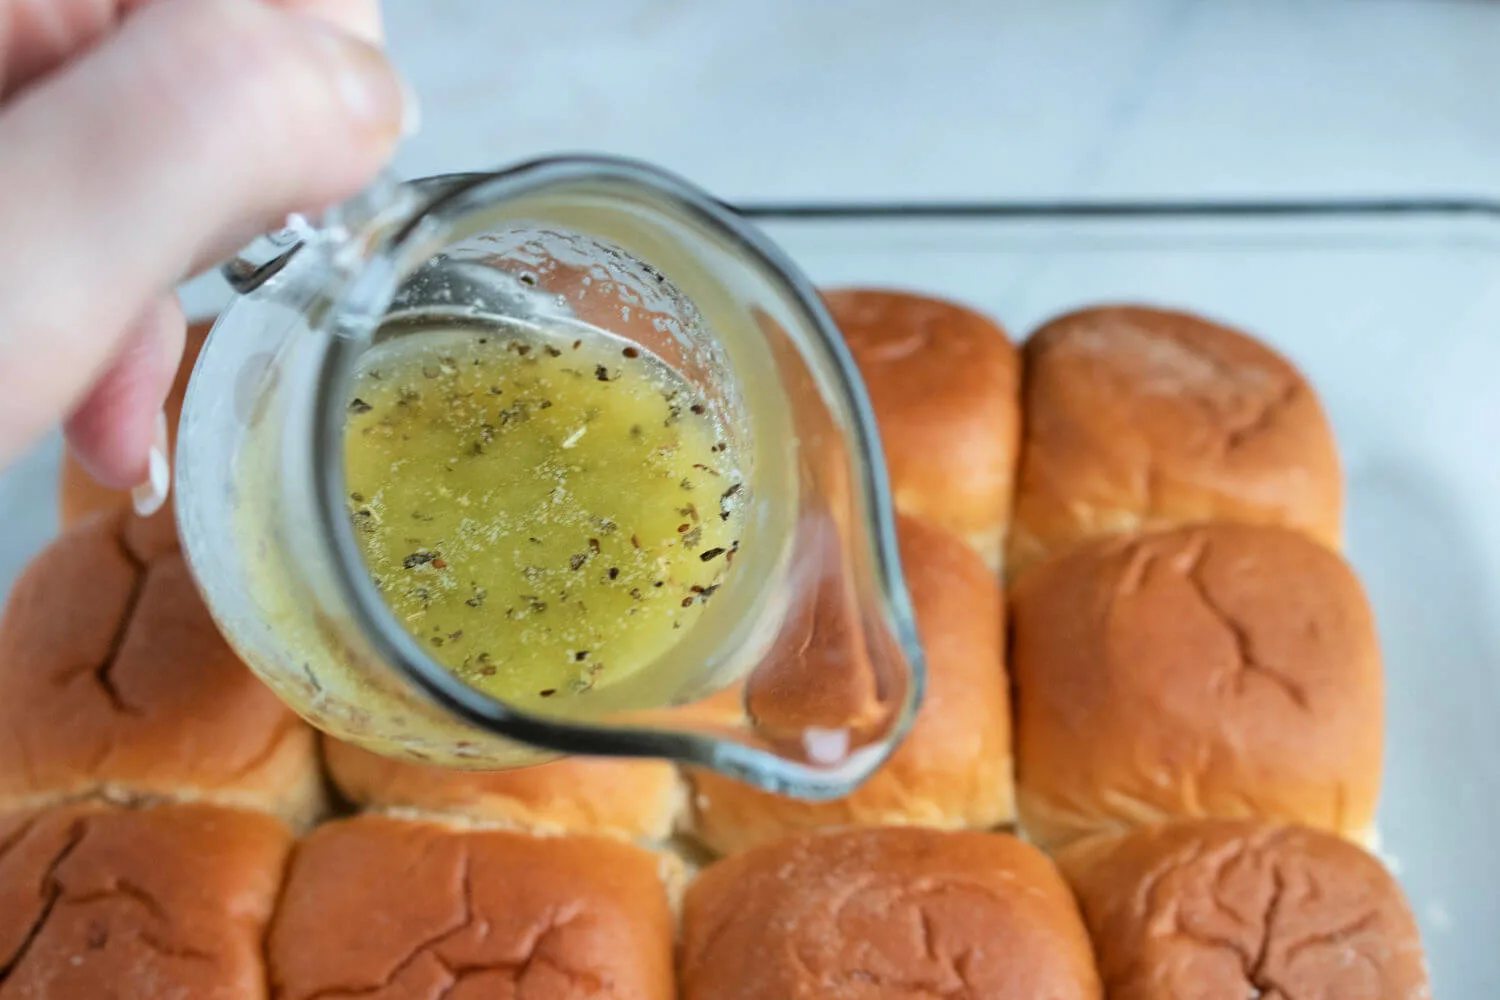 Pour herbed butter over sliders before baking